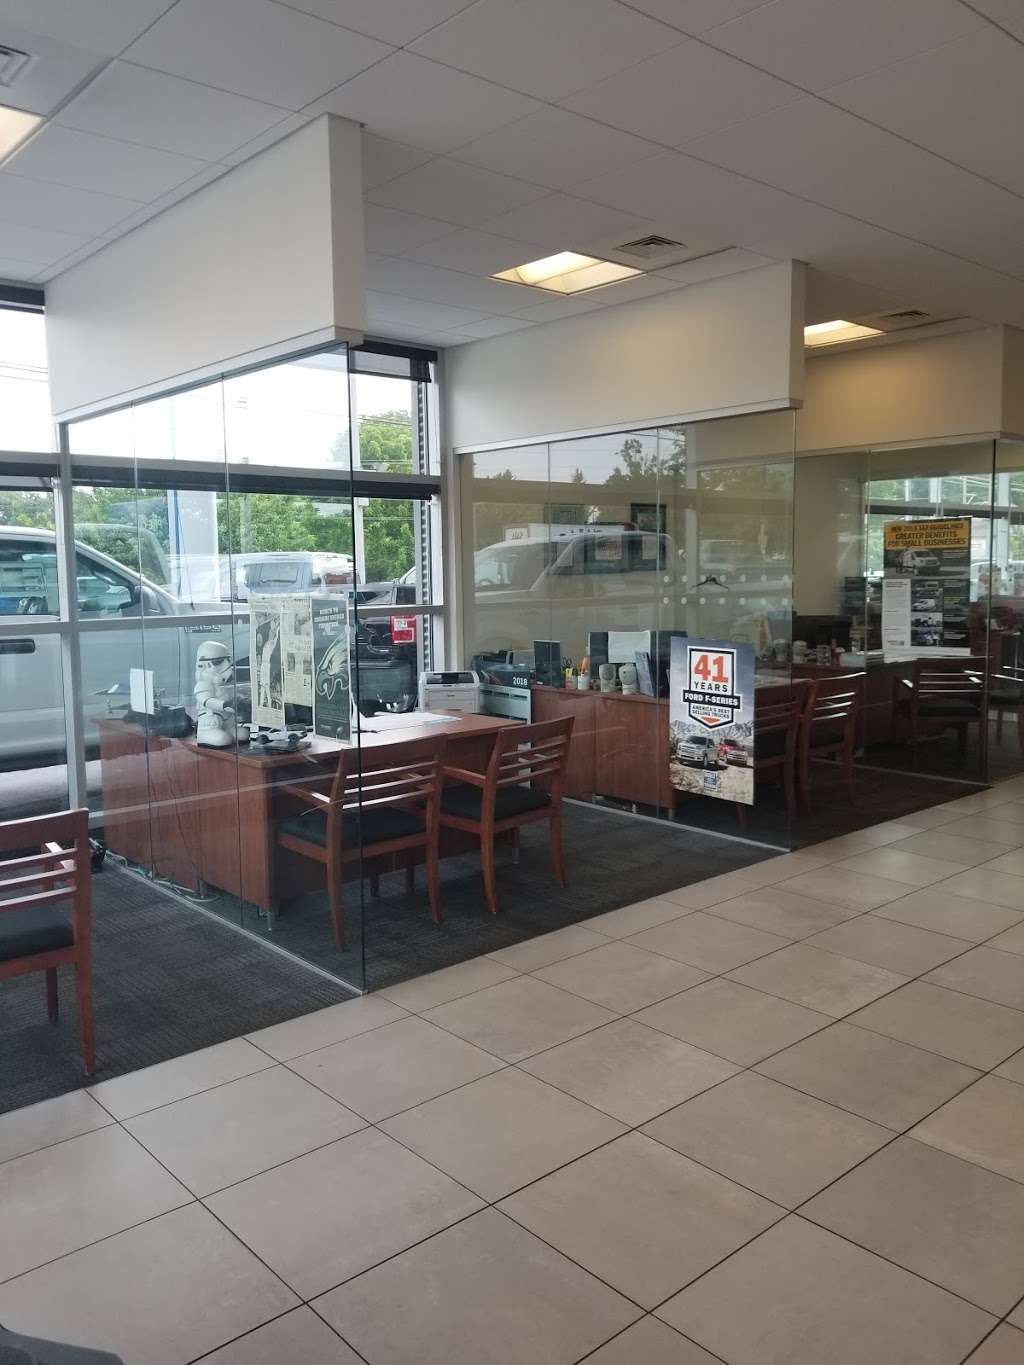 Pacifico Marple Ford Lincoln | 3015 West Chester Pike, Broomall, PA 19008, USA | Phone: (888) 320-6221